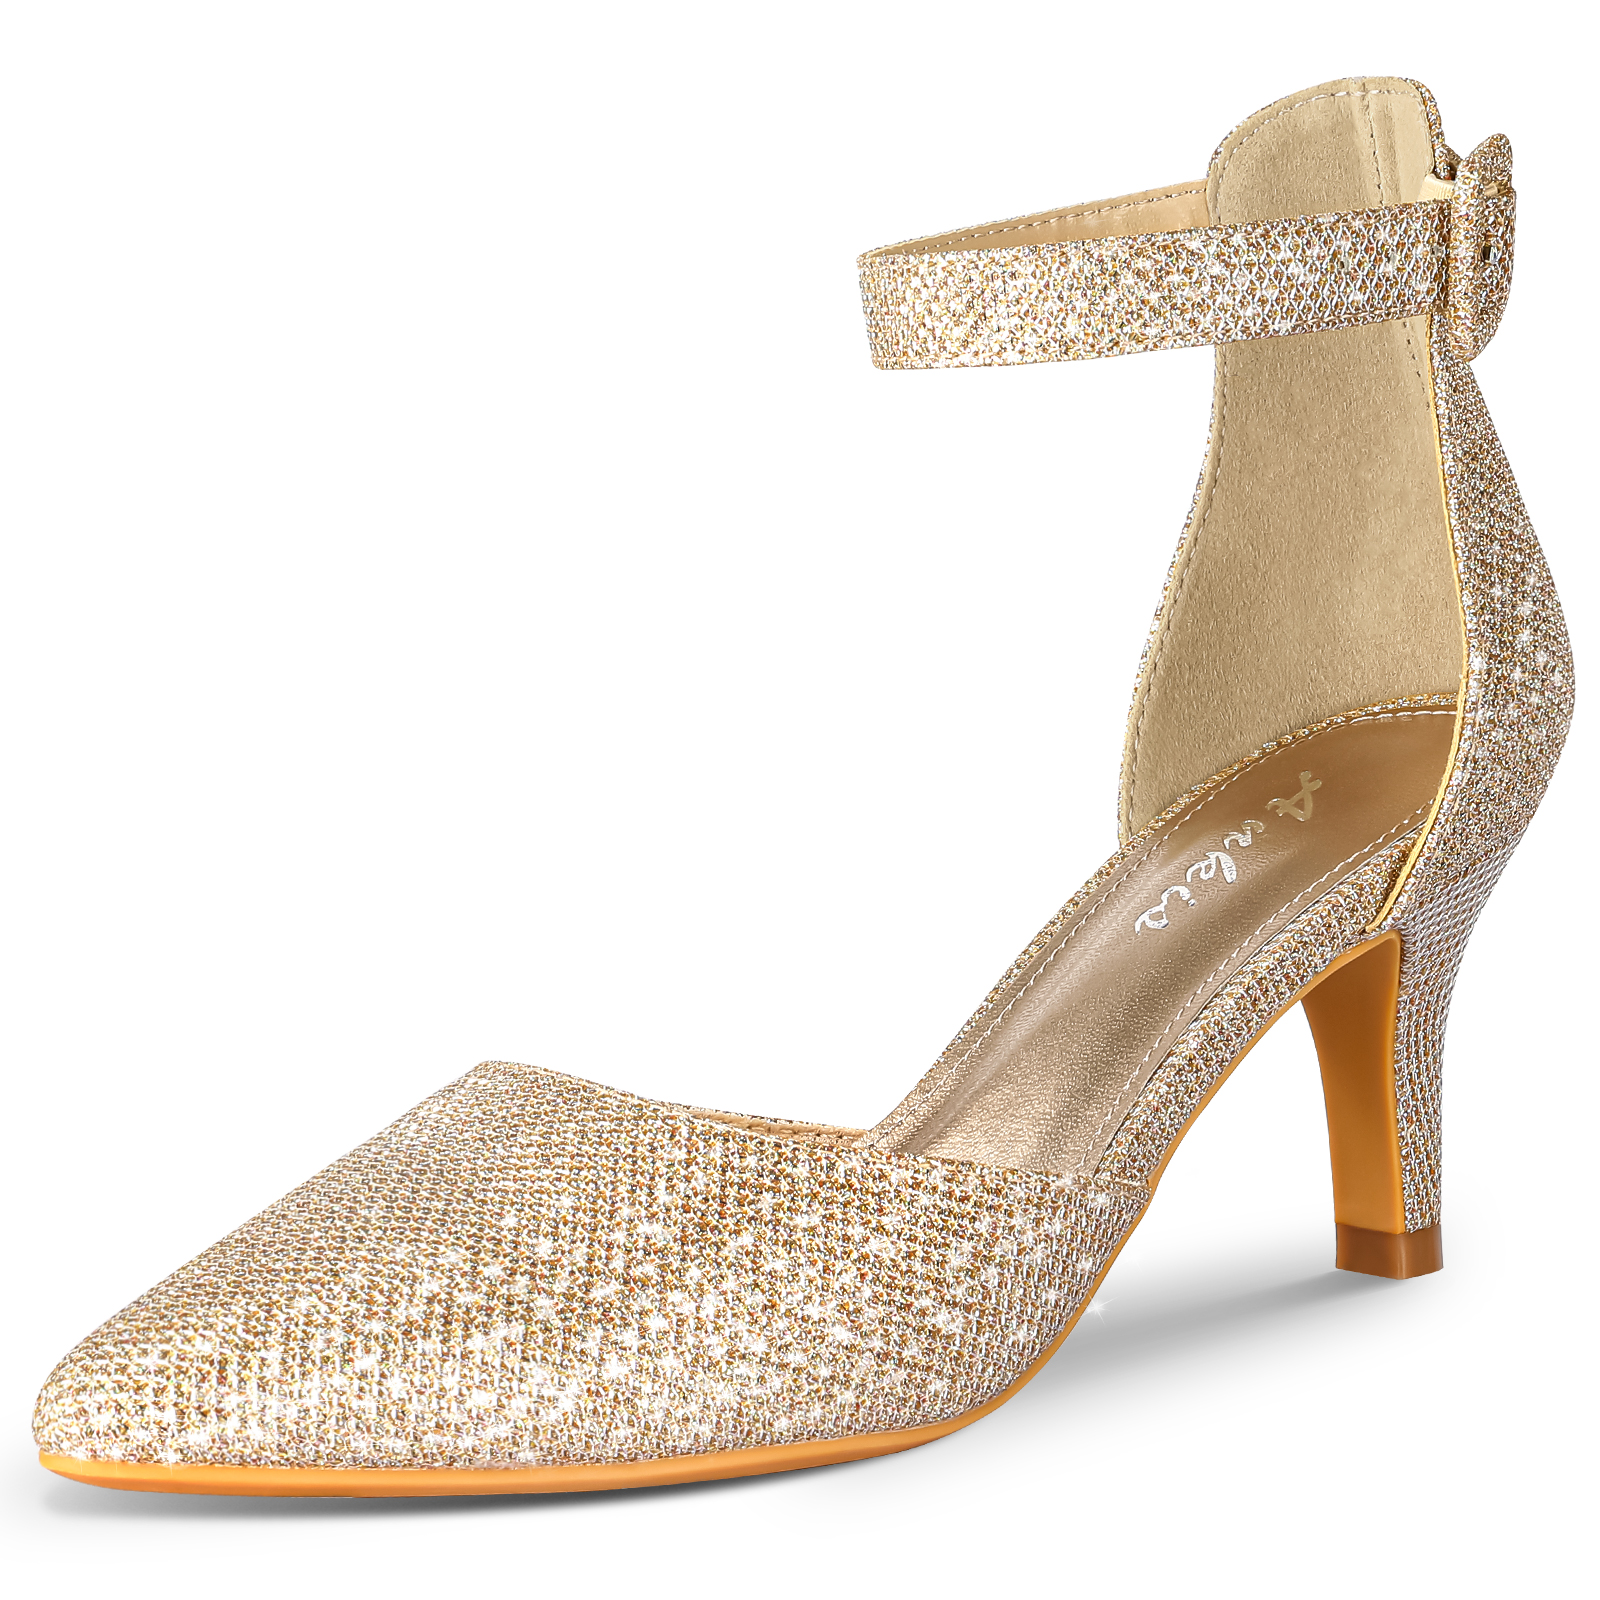 Ankis Women's Pumps Low Heel 2.6 Inches-Gold